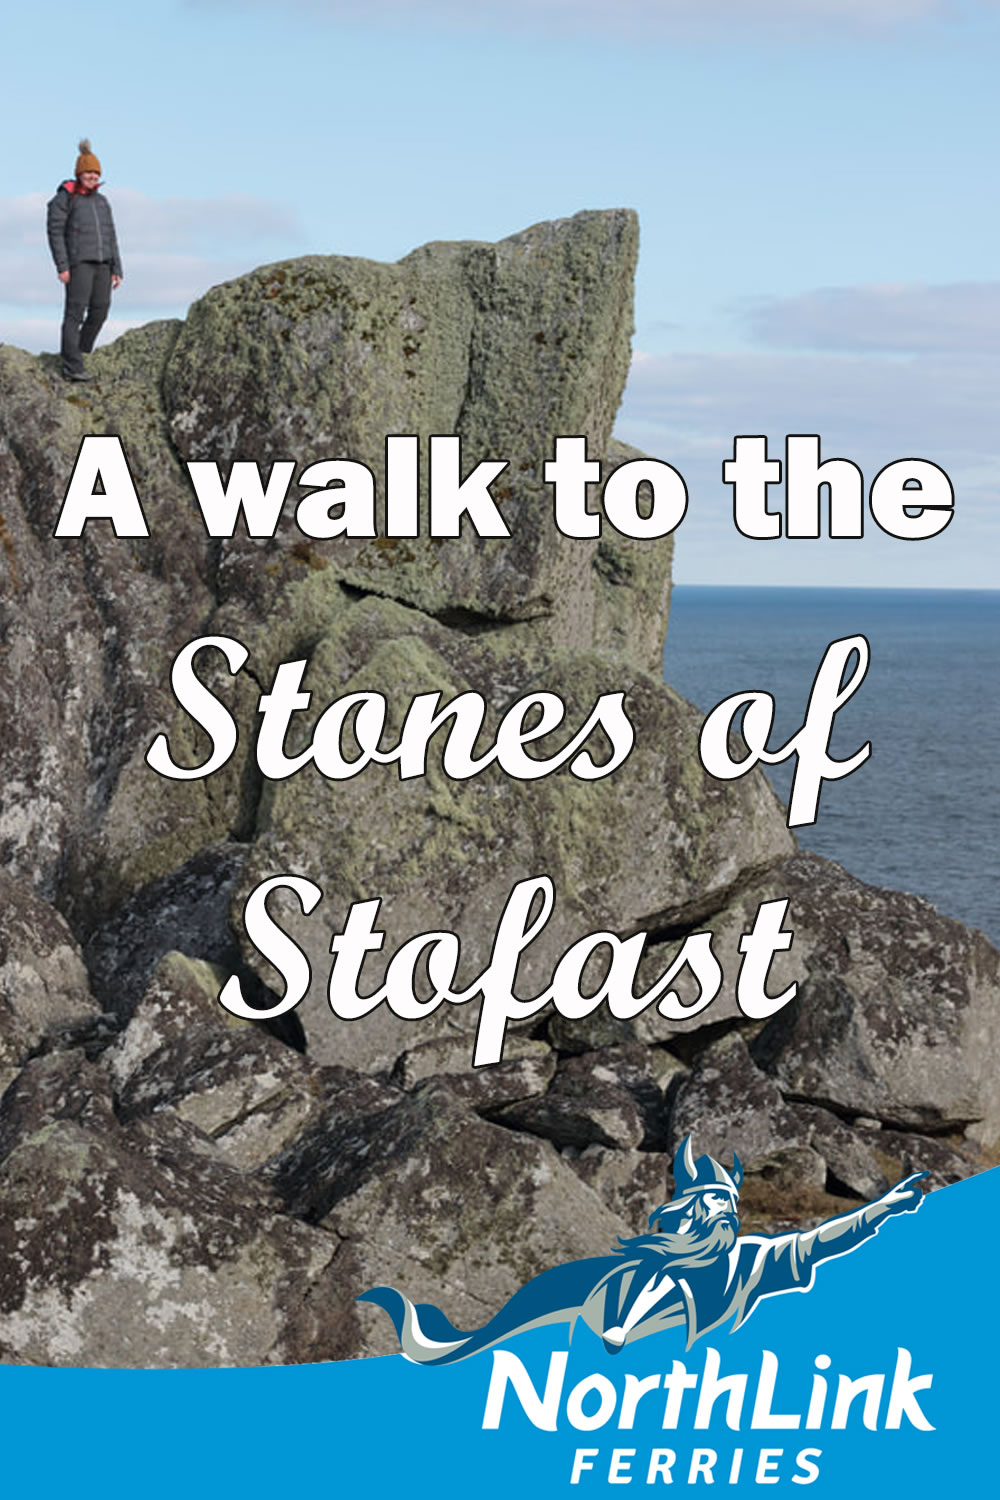 A walk to the Stones of Stofast